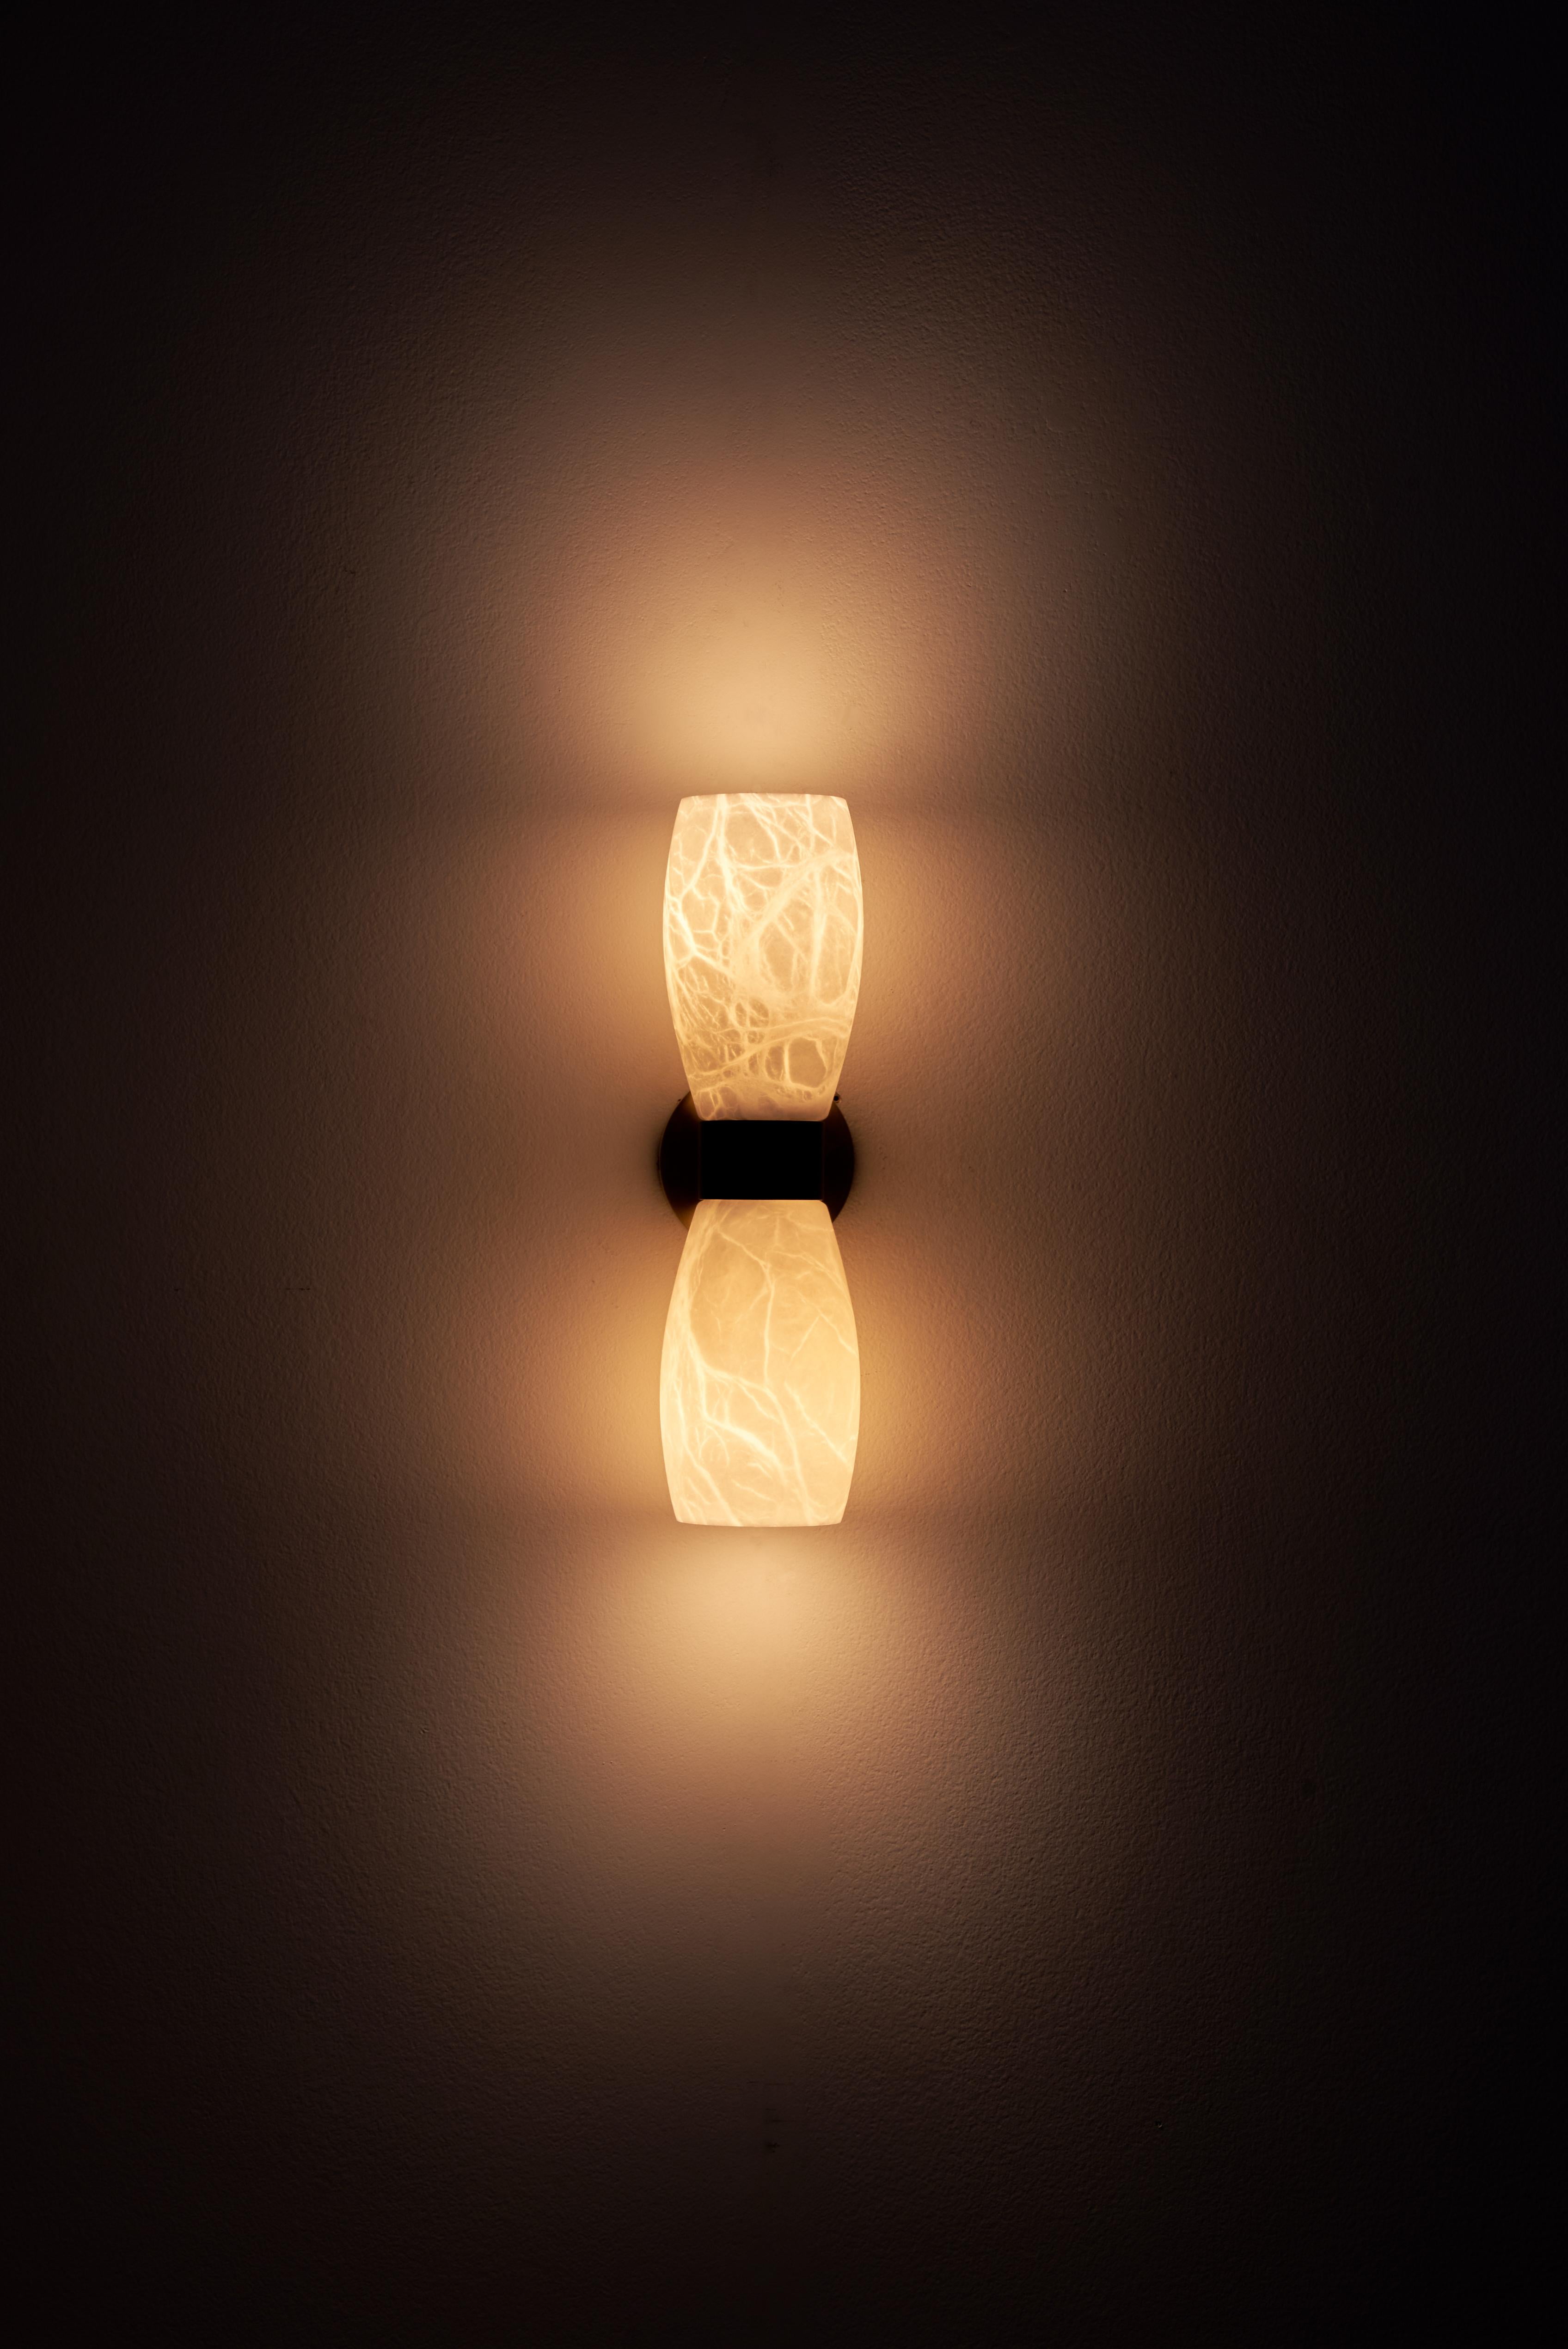 The Demetra wall sconce, inspired by the mid-century style, combines French gold and matte black finishes with alabaster to create a mesmerizing display.
The ethereal glow emitted by the illuminated cups seems to hover in the air, casting a gentle,